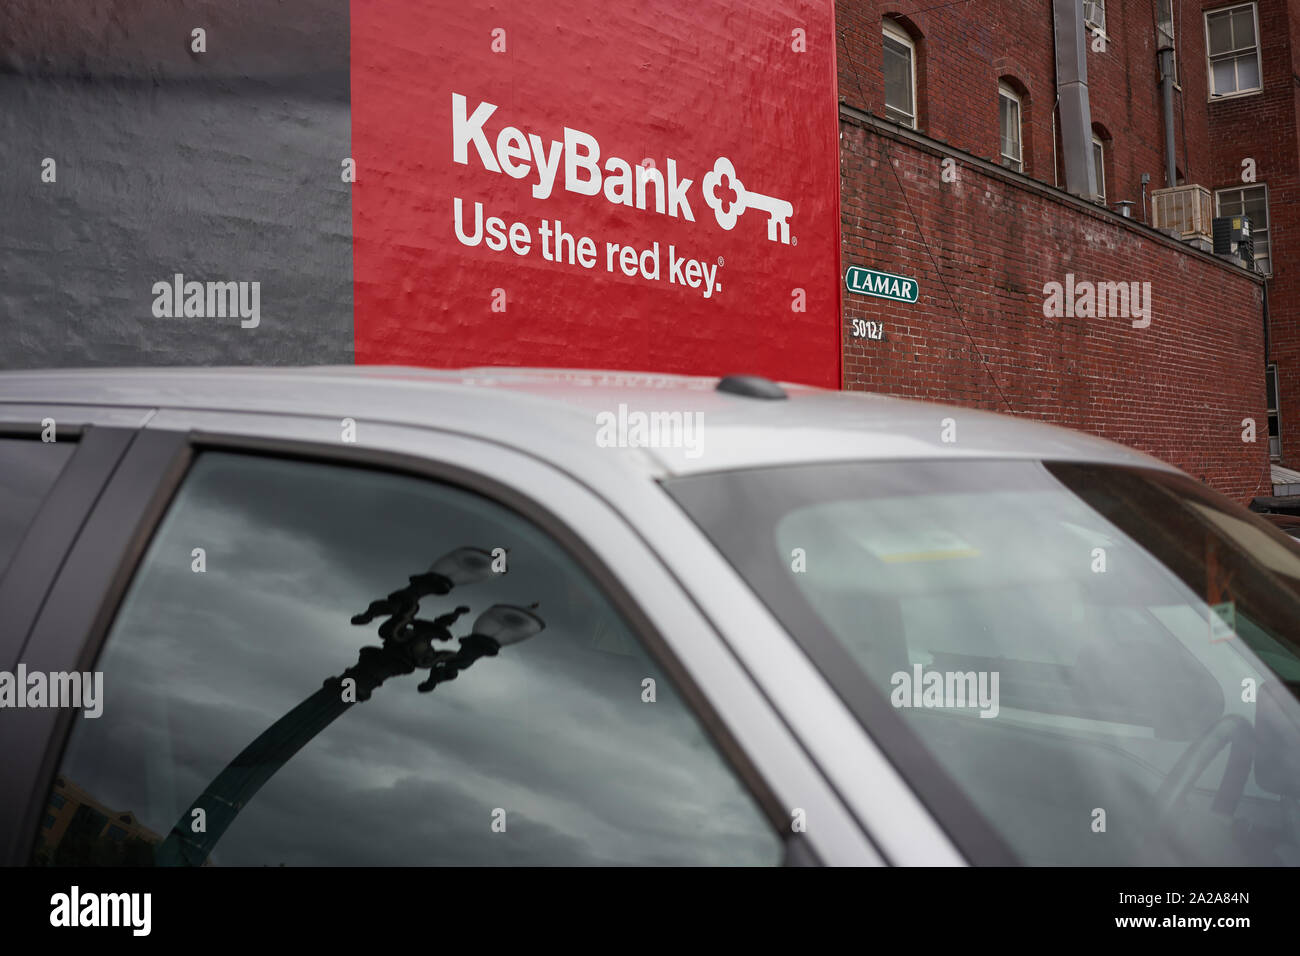 Portland, Oregon, USA - Sep 27, 2019: A KeyBank poster is seen on a side of a building from a parking lot in downtown Portland. Stock Photo